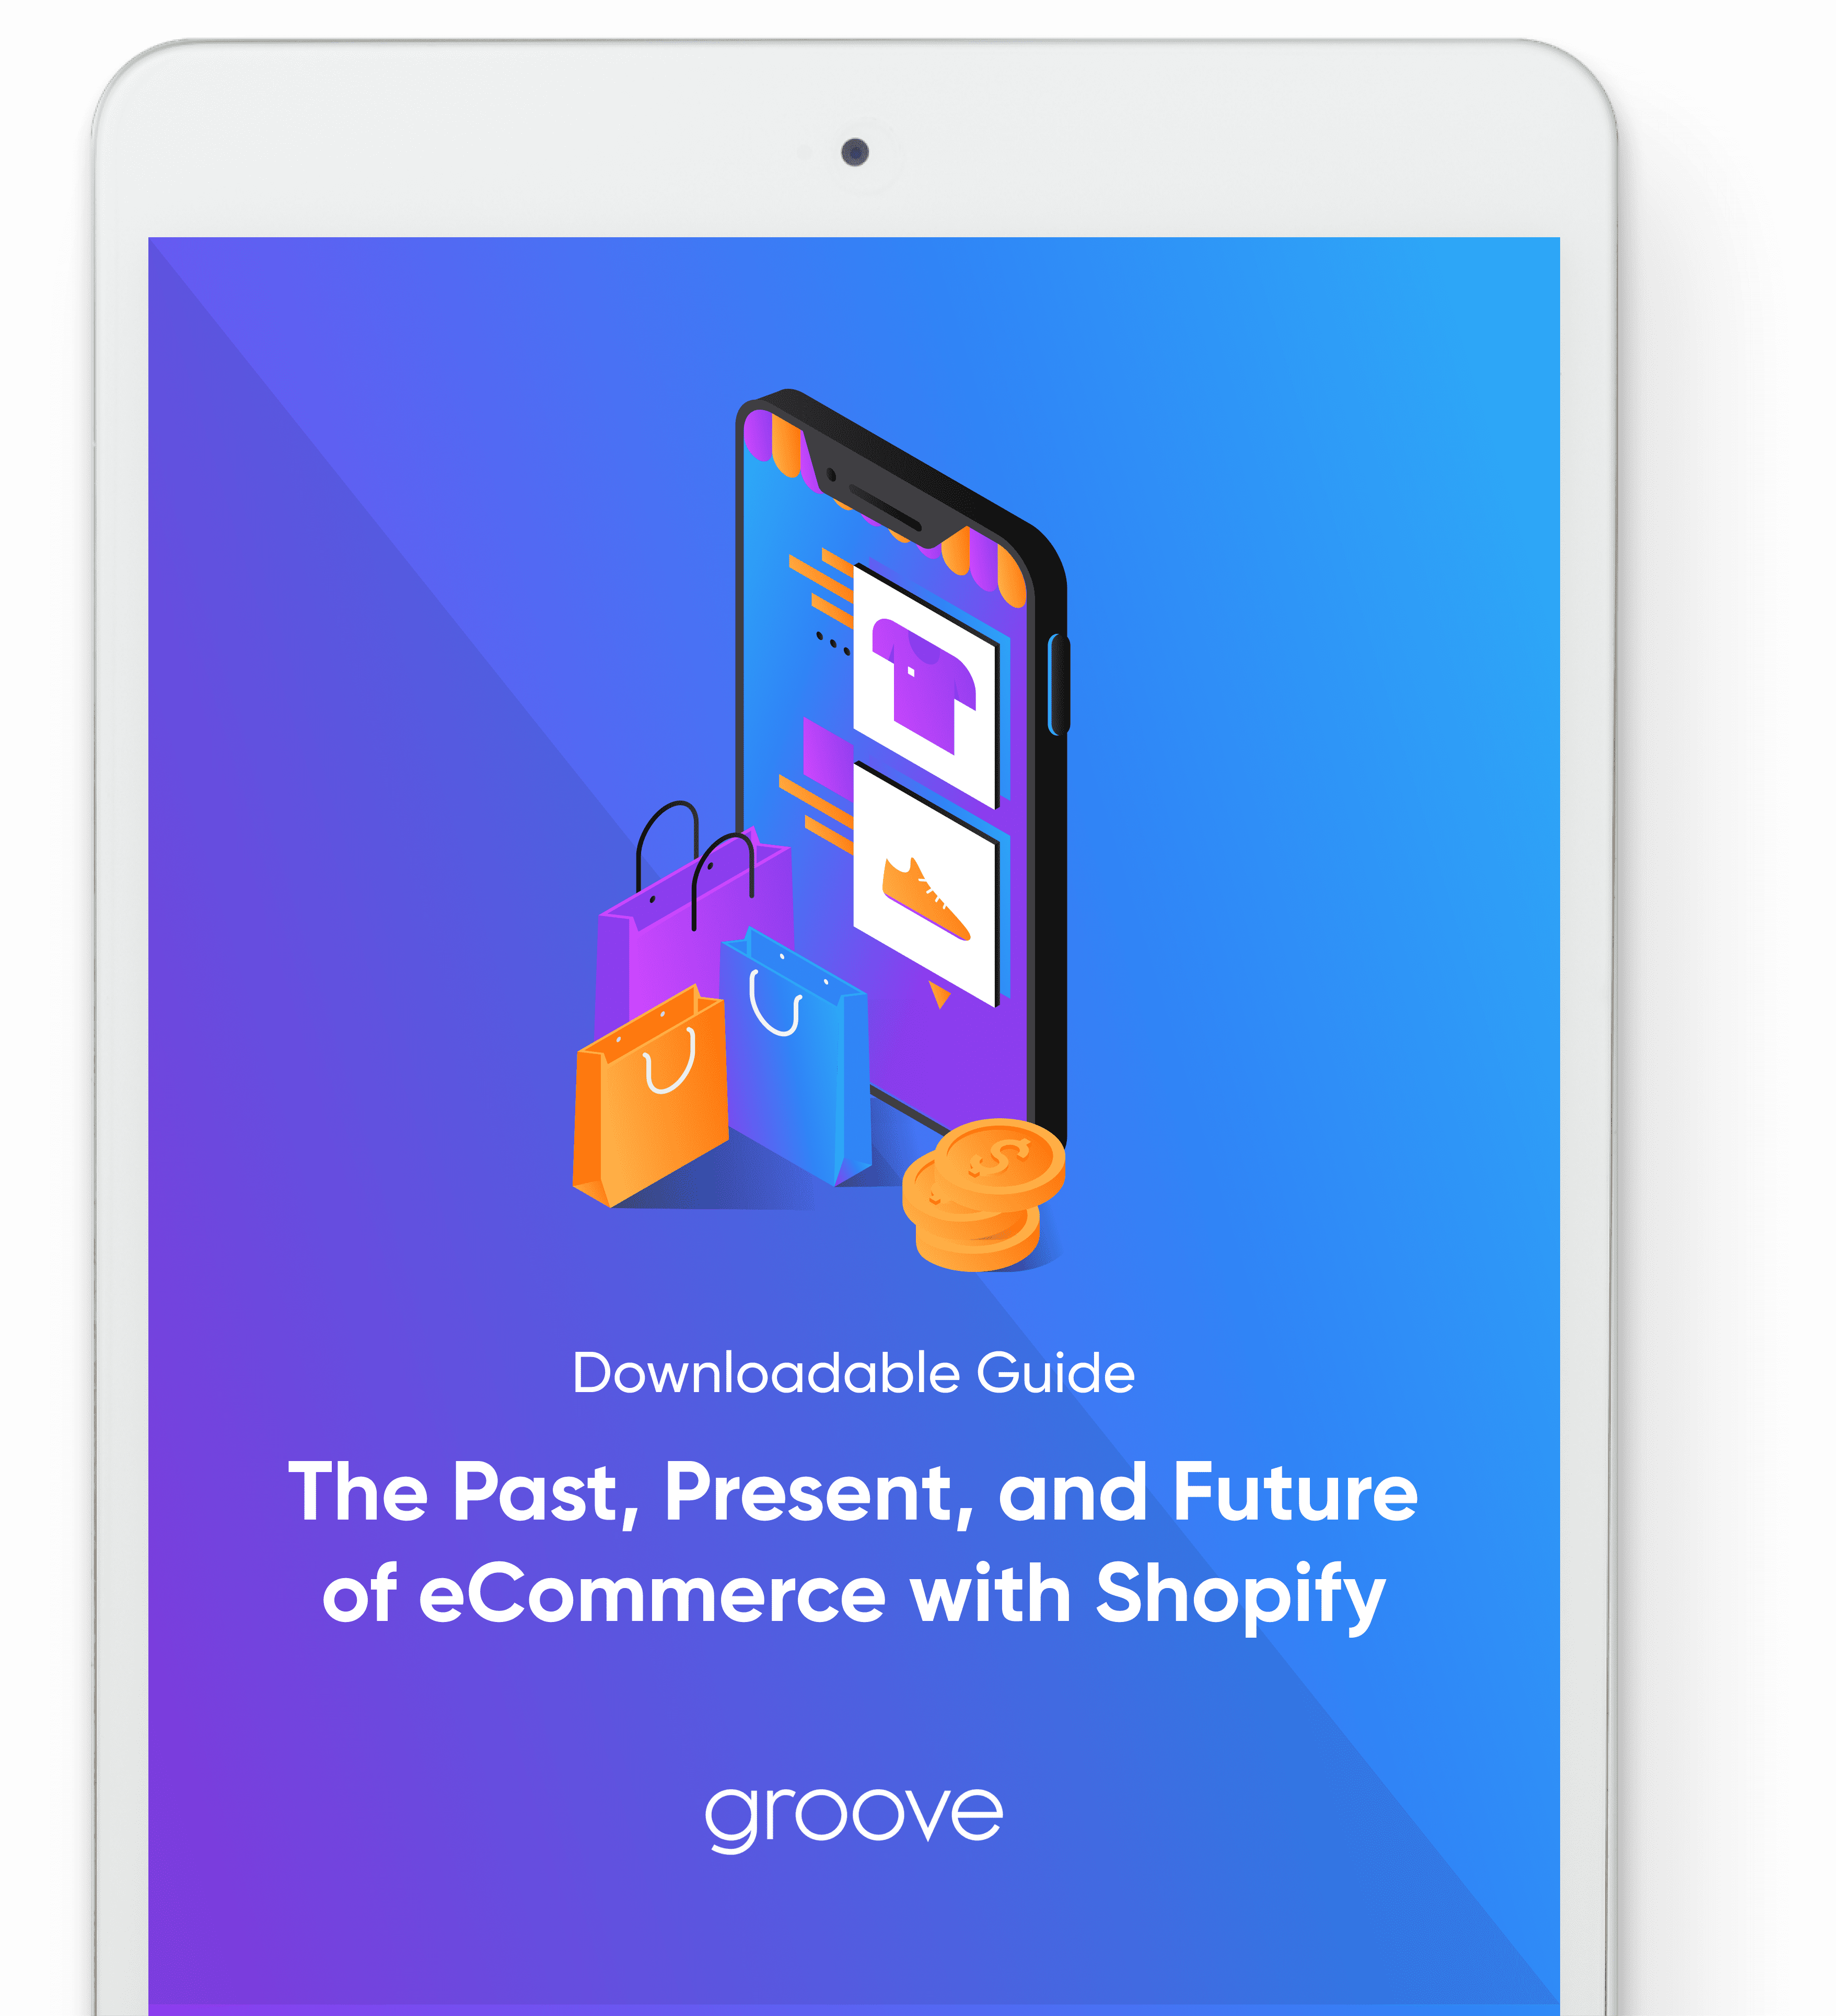 The Past, Present, and Future of eCommerce with Shopify